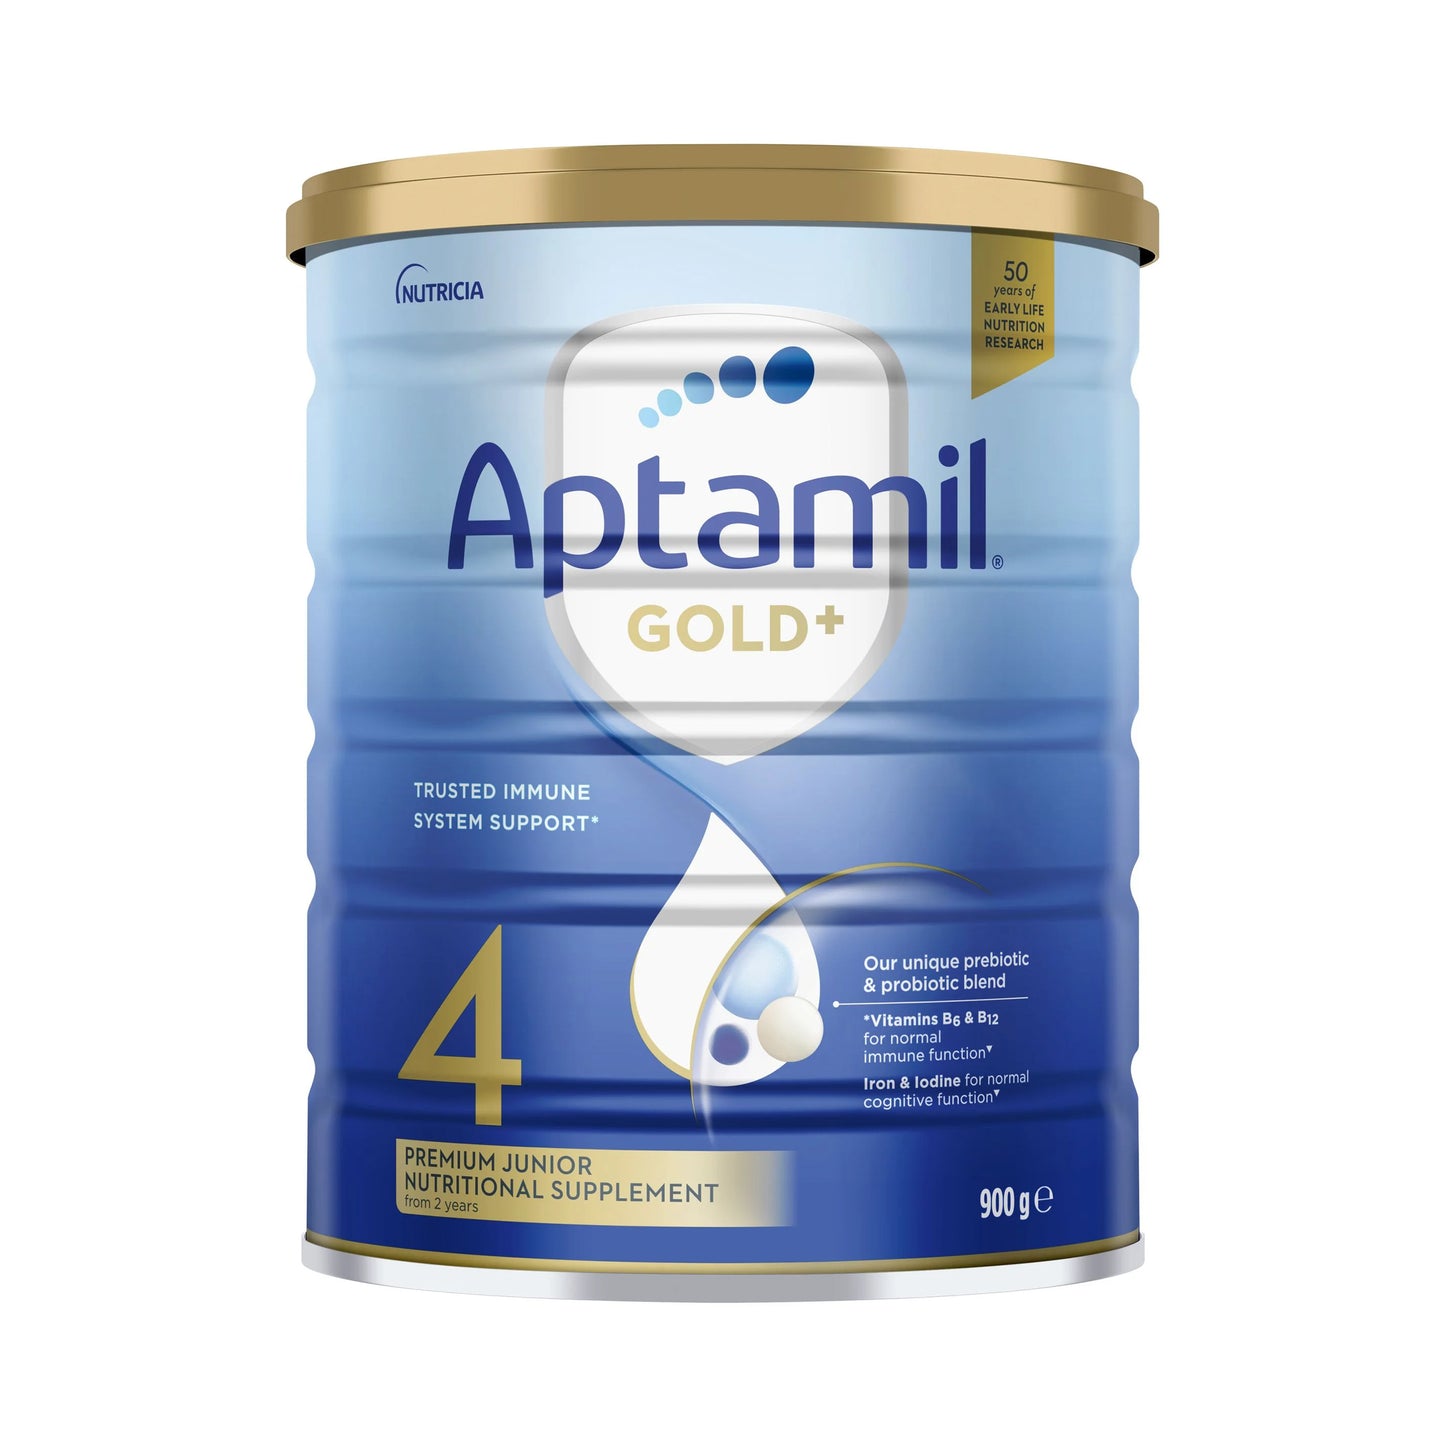 Nutricia Aptamil Gold+ 4 Premium Nutritional Supplement From 2 Years 900g